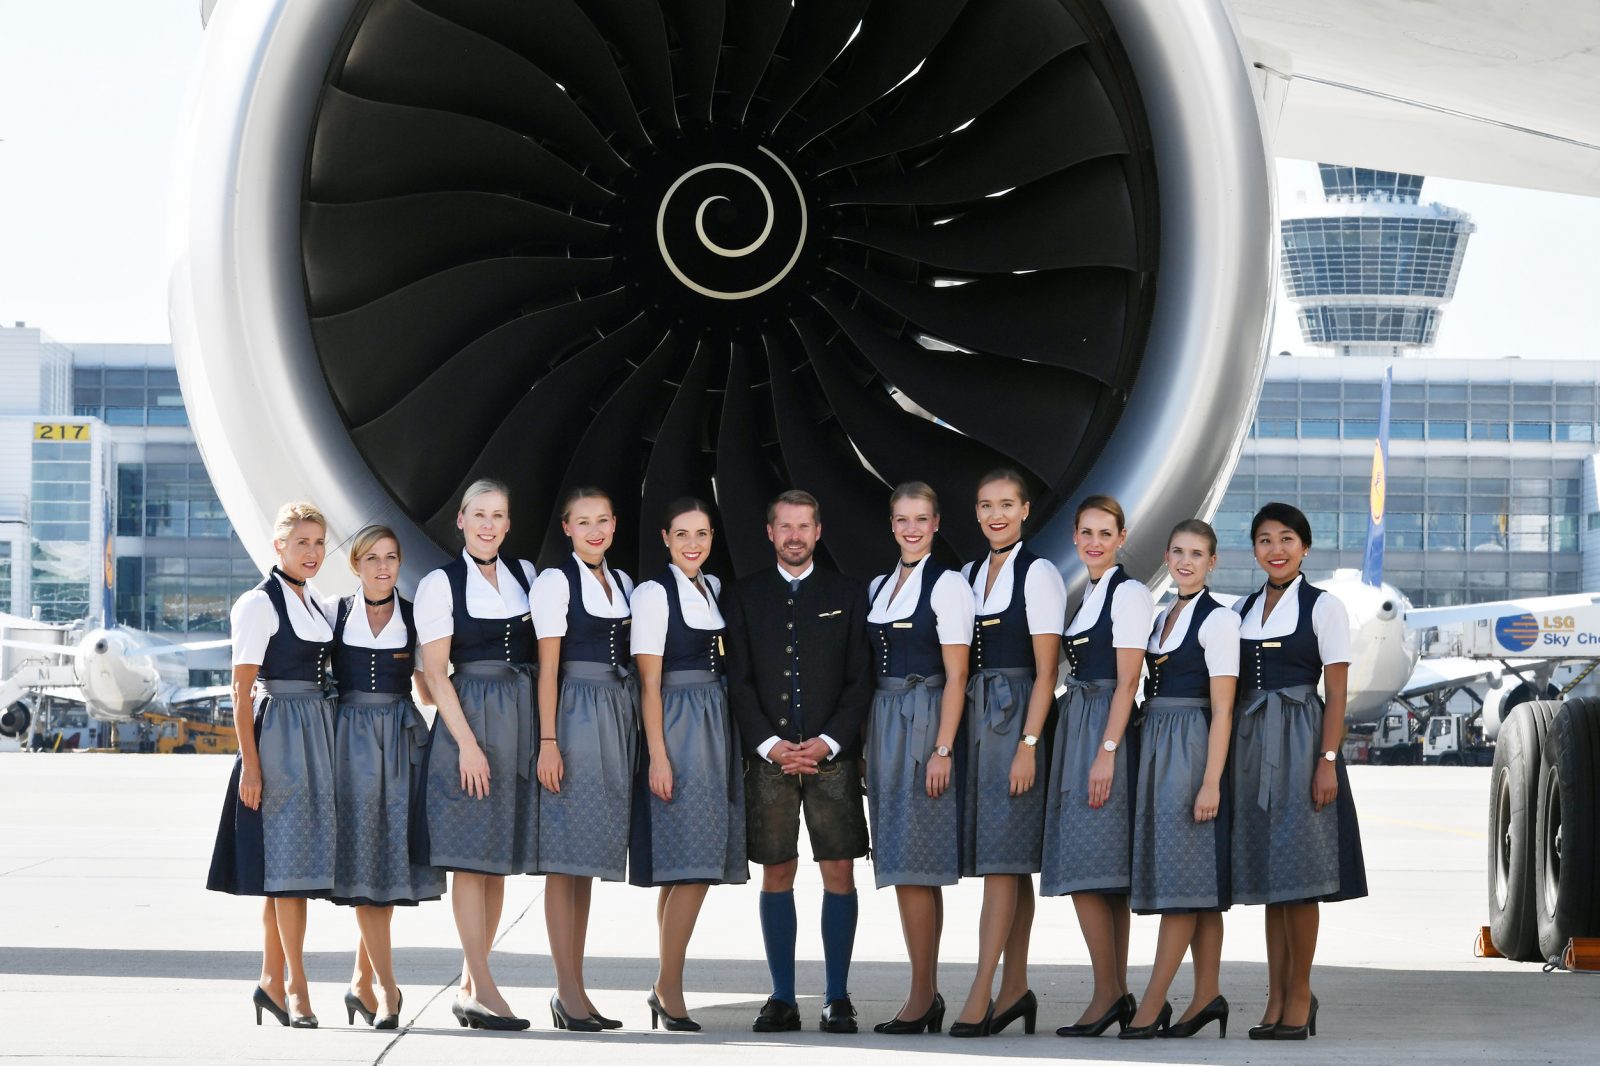 a group of people standing in front of a large jet engine